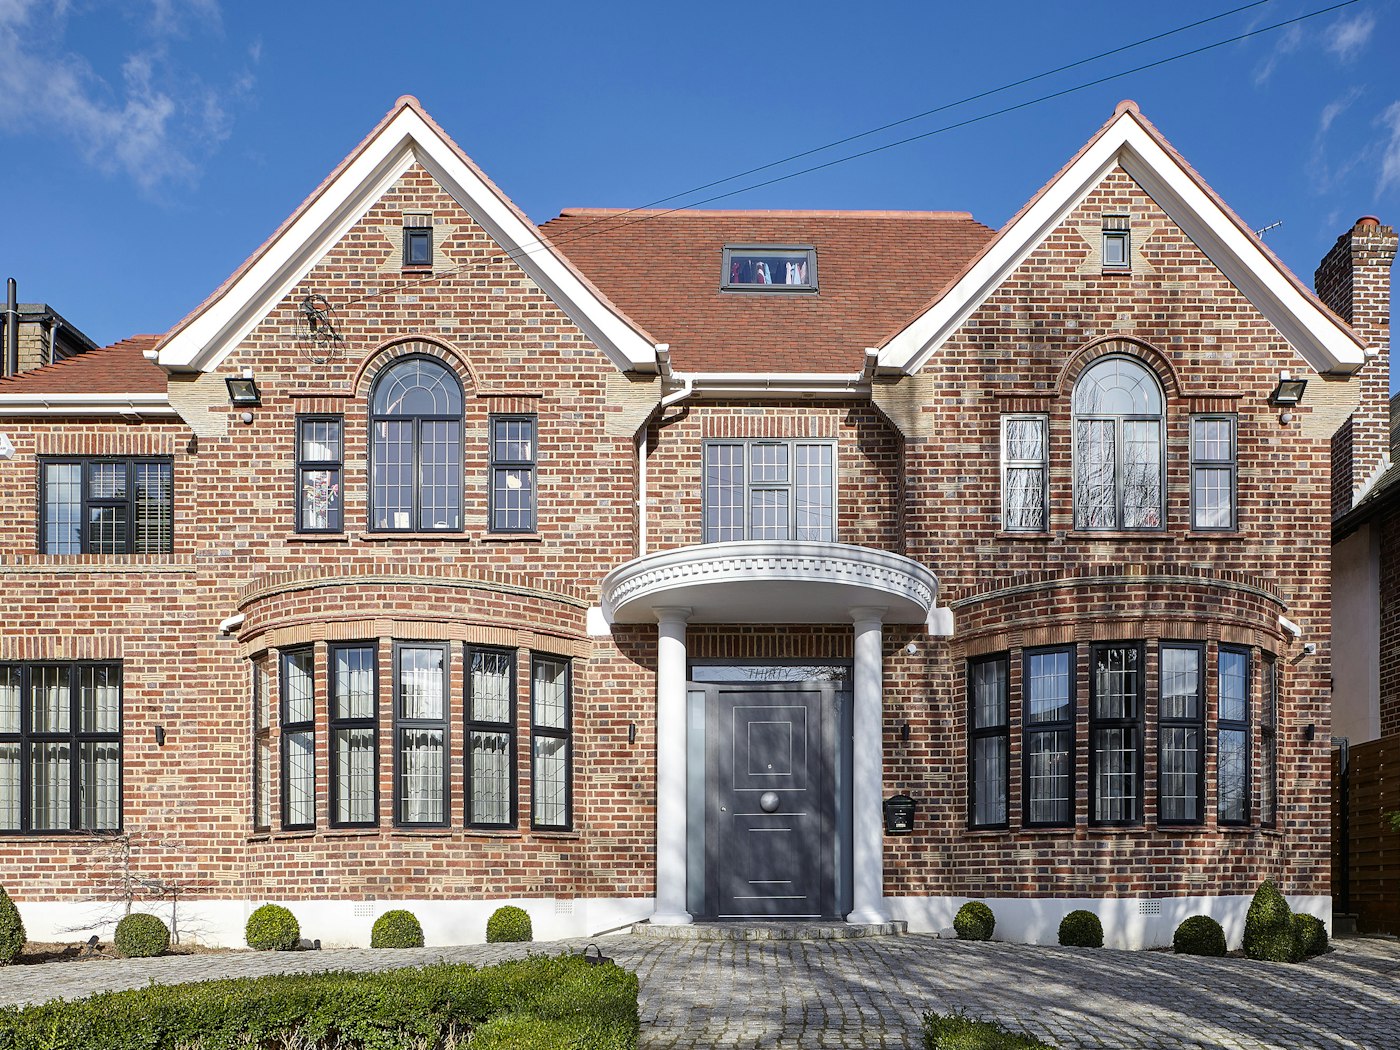 This traditionally styled house has had a thoroughly modern makeover with an Urban Front grey painted front door